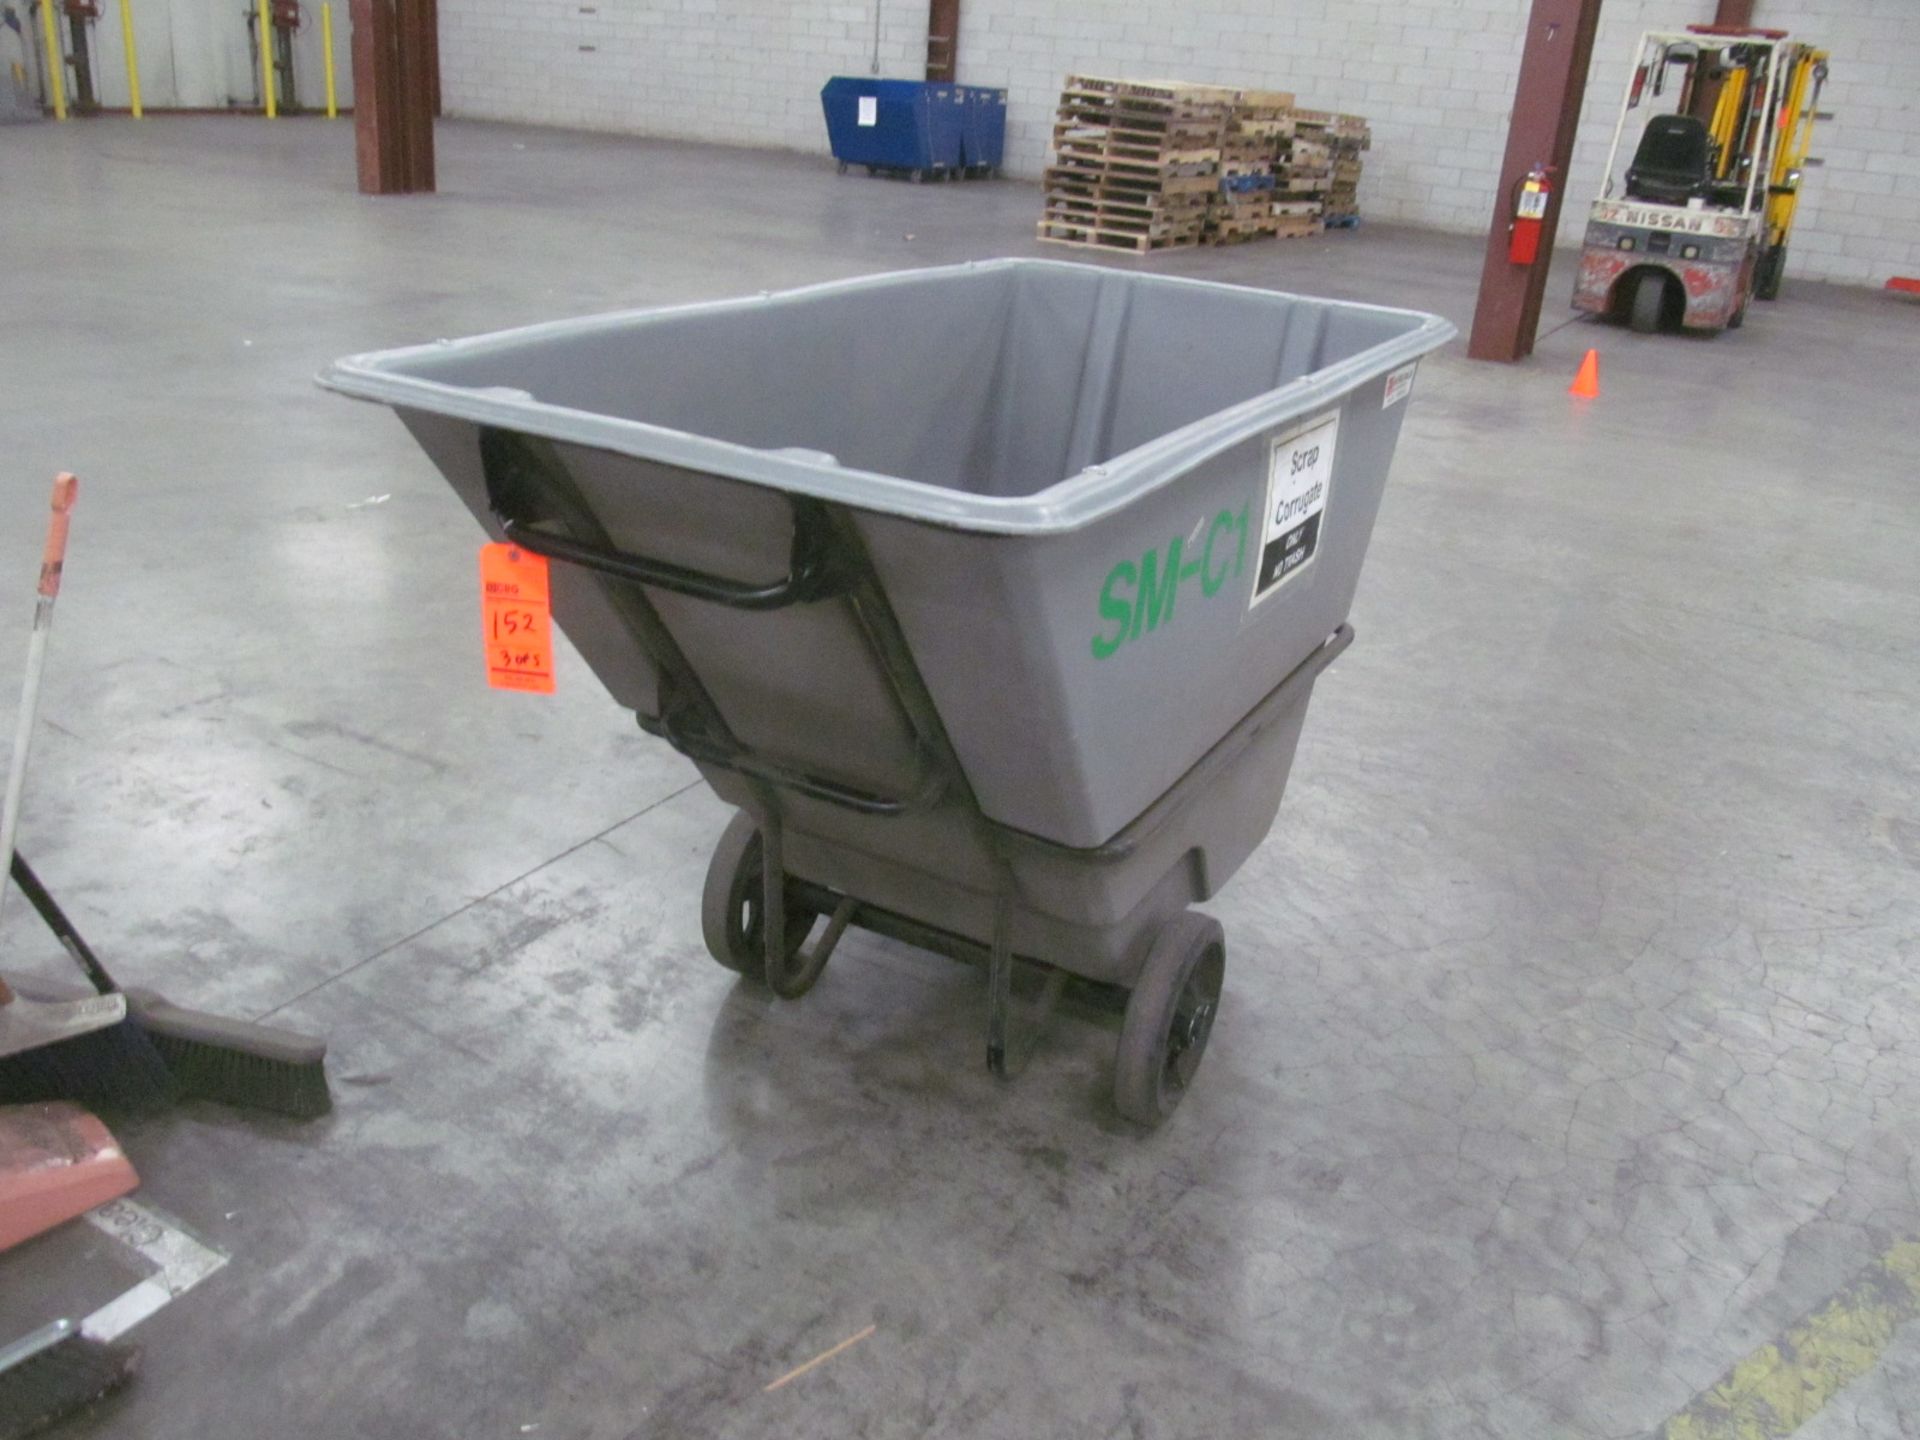 Lot of (5) assorted Akromils self-dumping hoppers with metal frame and plastic hopper- (1) yard